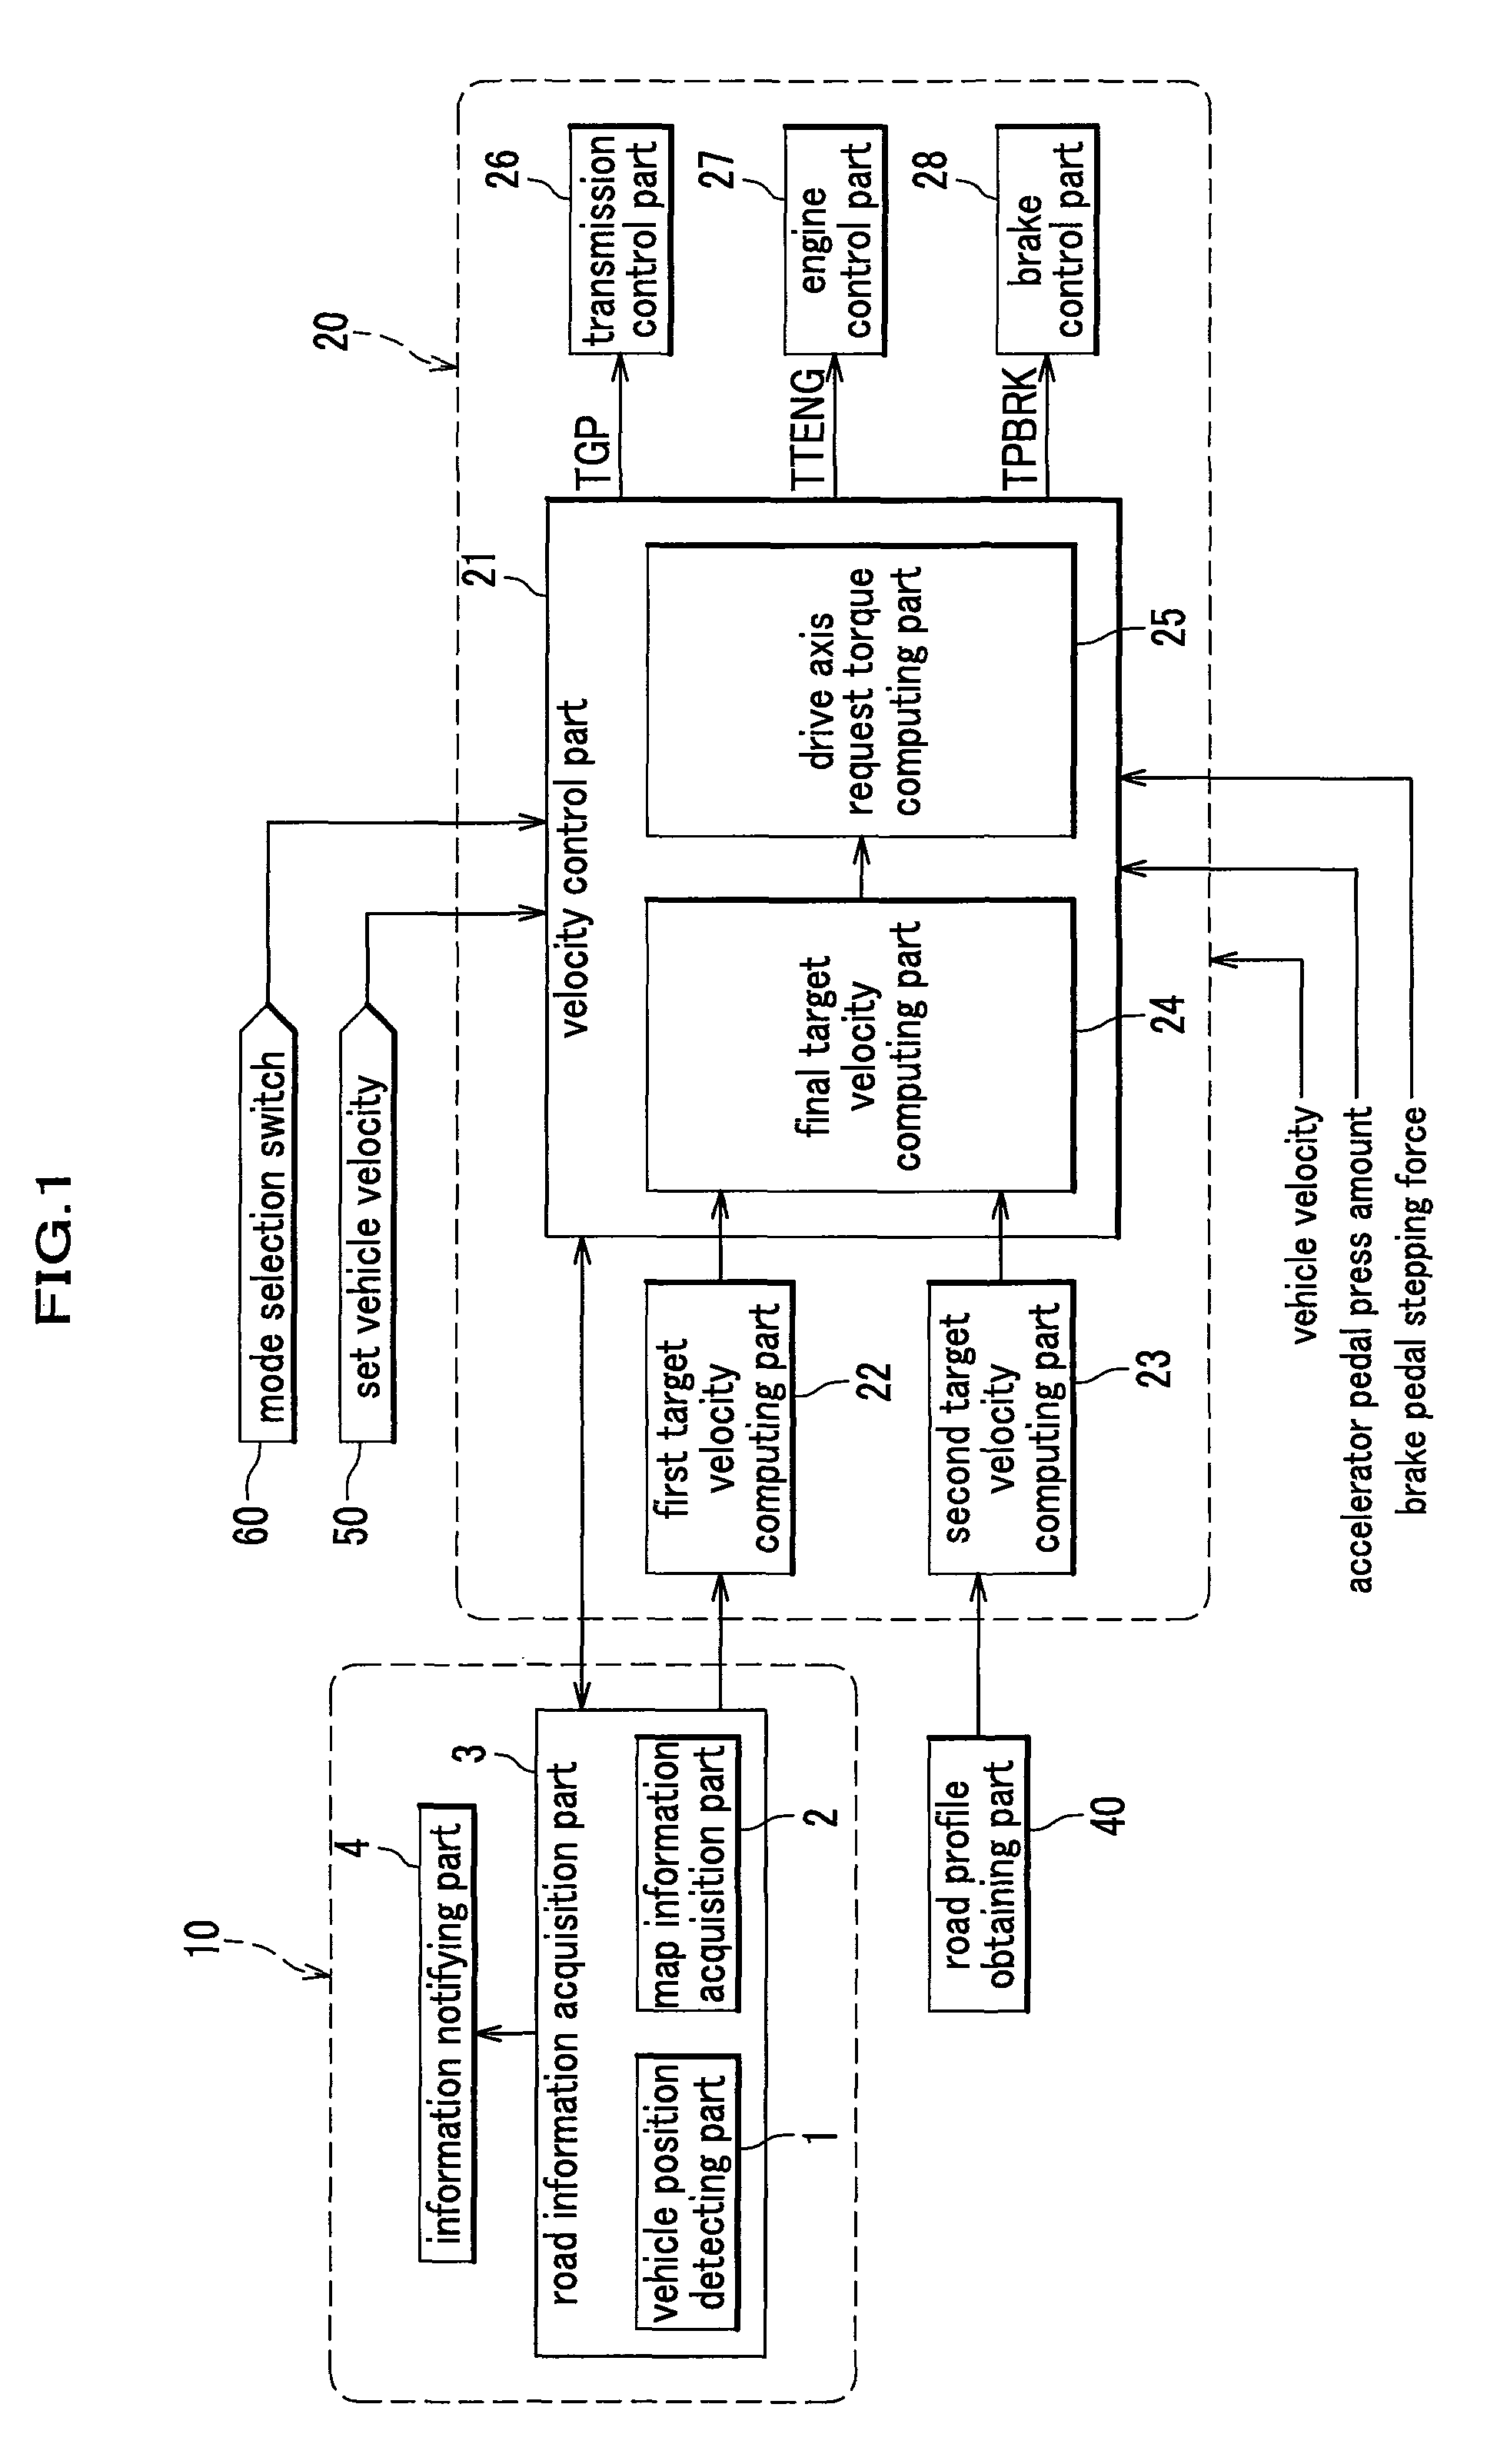 Vehicle speed control system